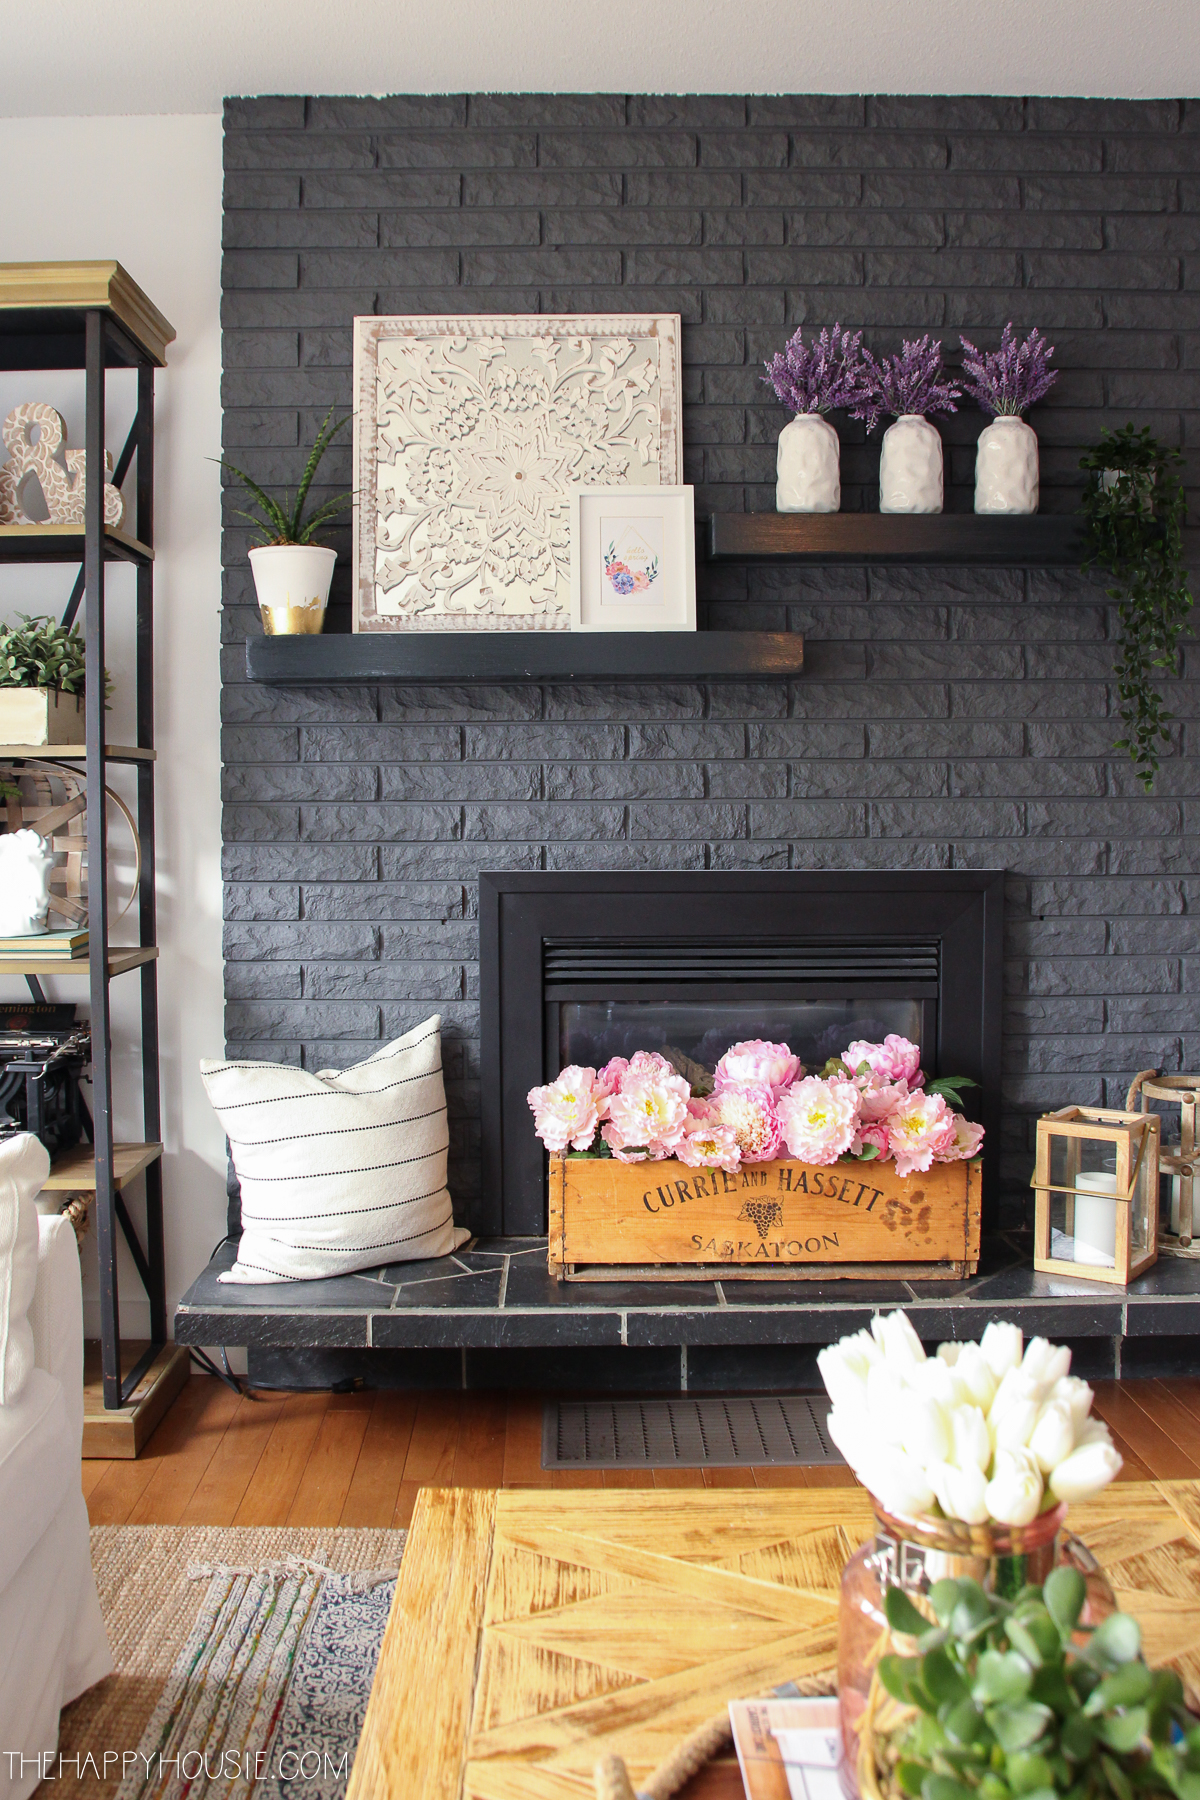 There are 3 white vases with lilac and a small wooden box with peonies on the fireplace mantel.